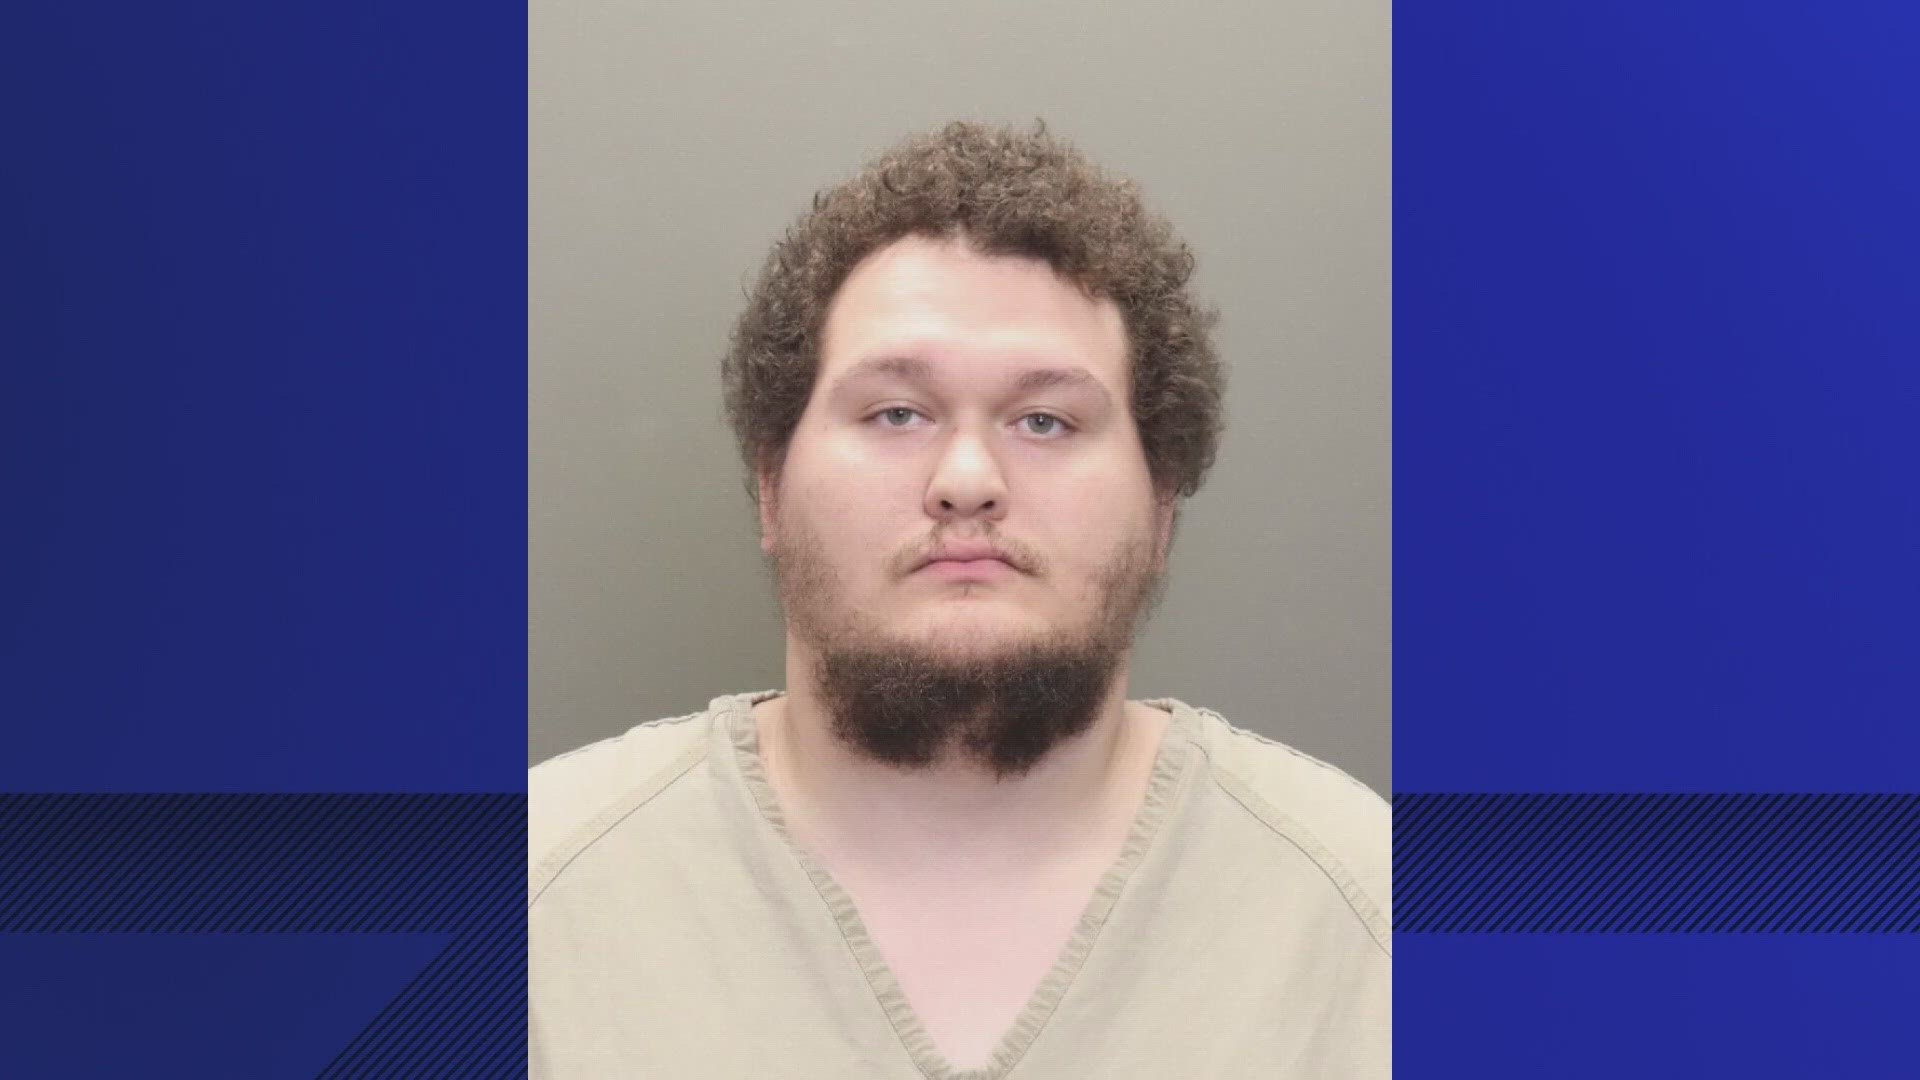 Joshua Pearson, now 23, was a teenager when some of the alleged sexual assaults took place at Open Gate Church of God.